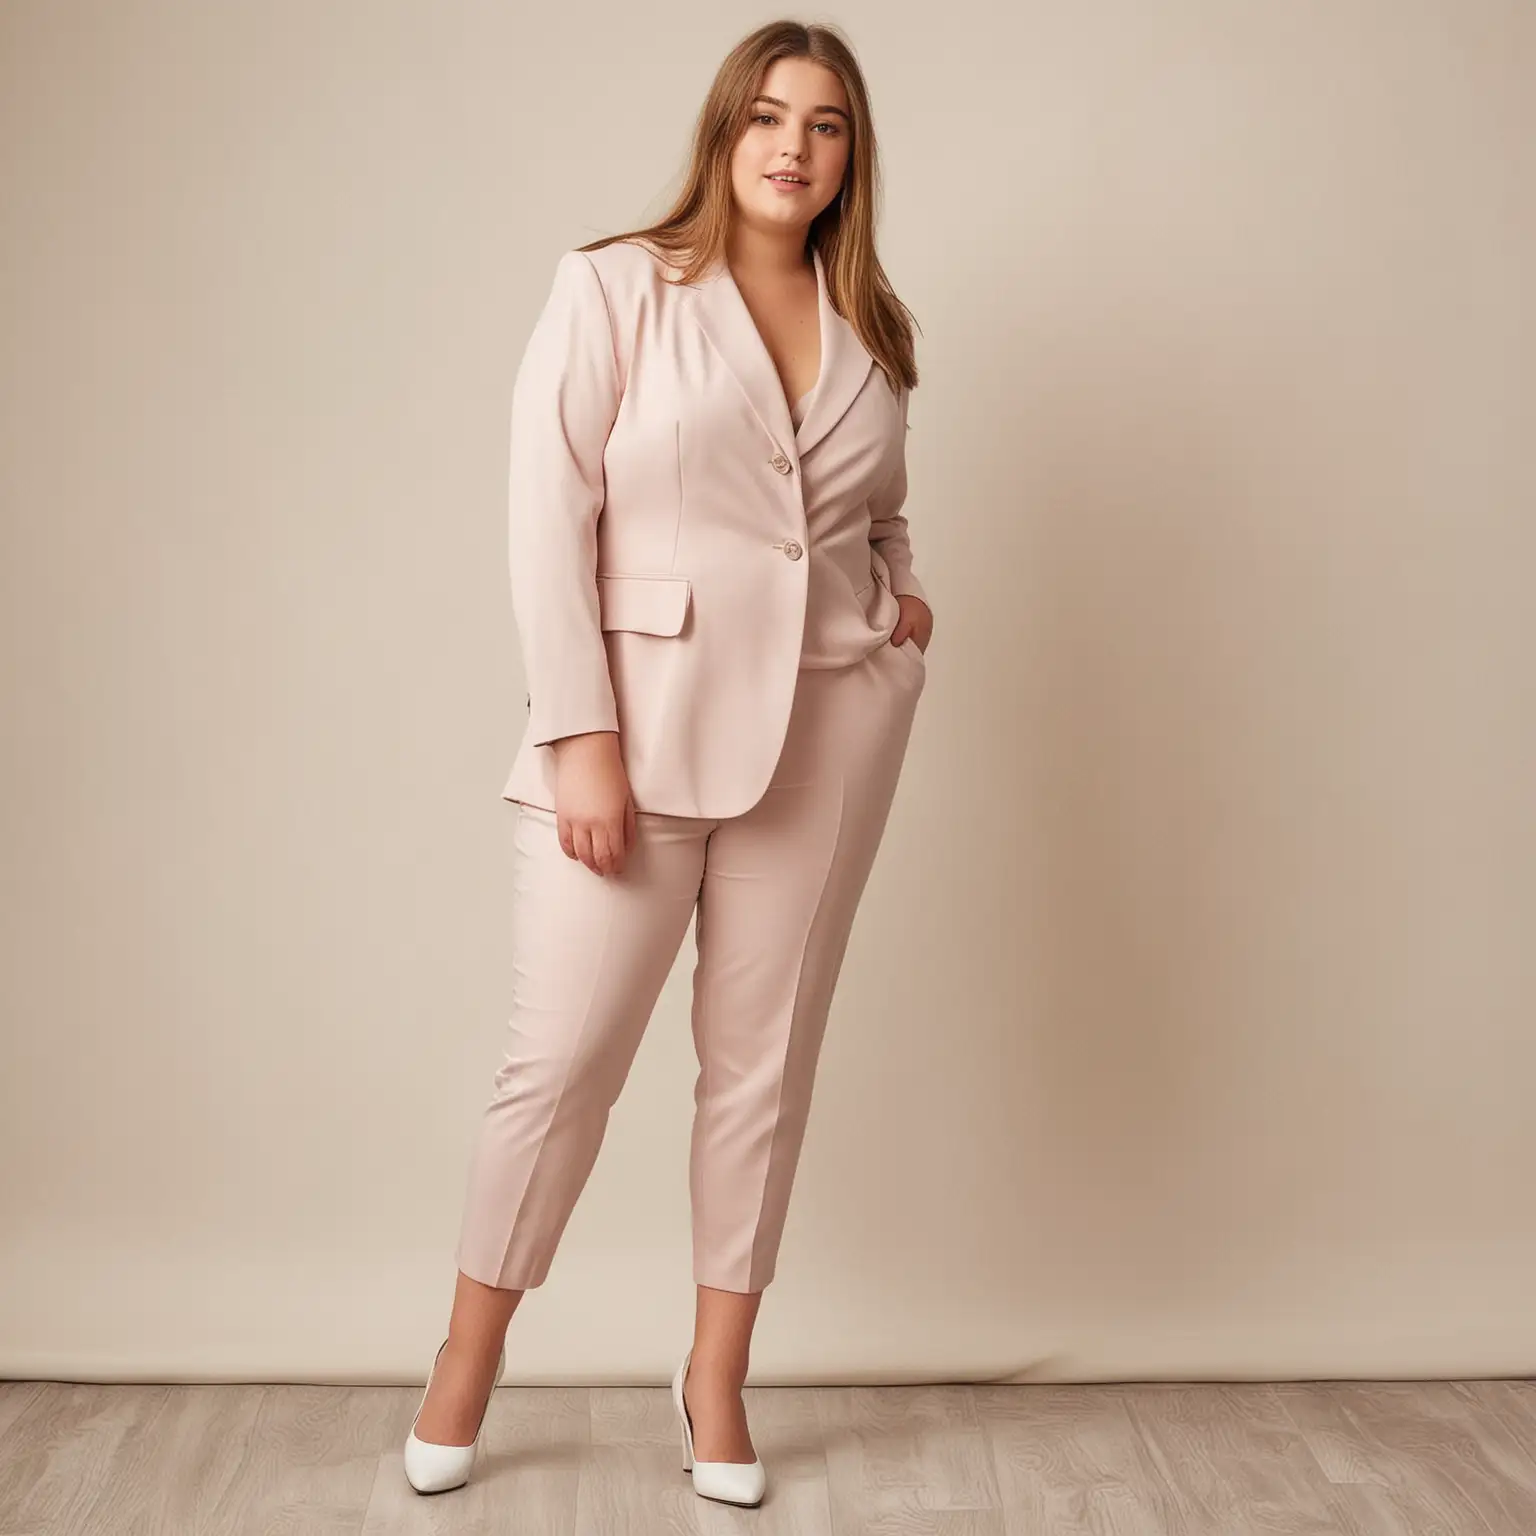 Curvy Plus Size Teen in Professional Pantsuit for Interview